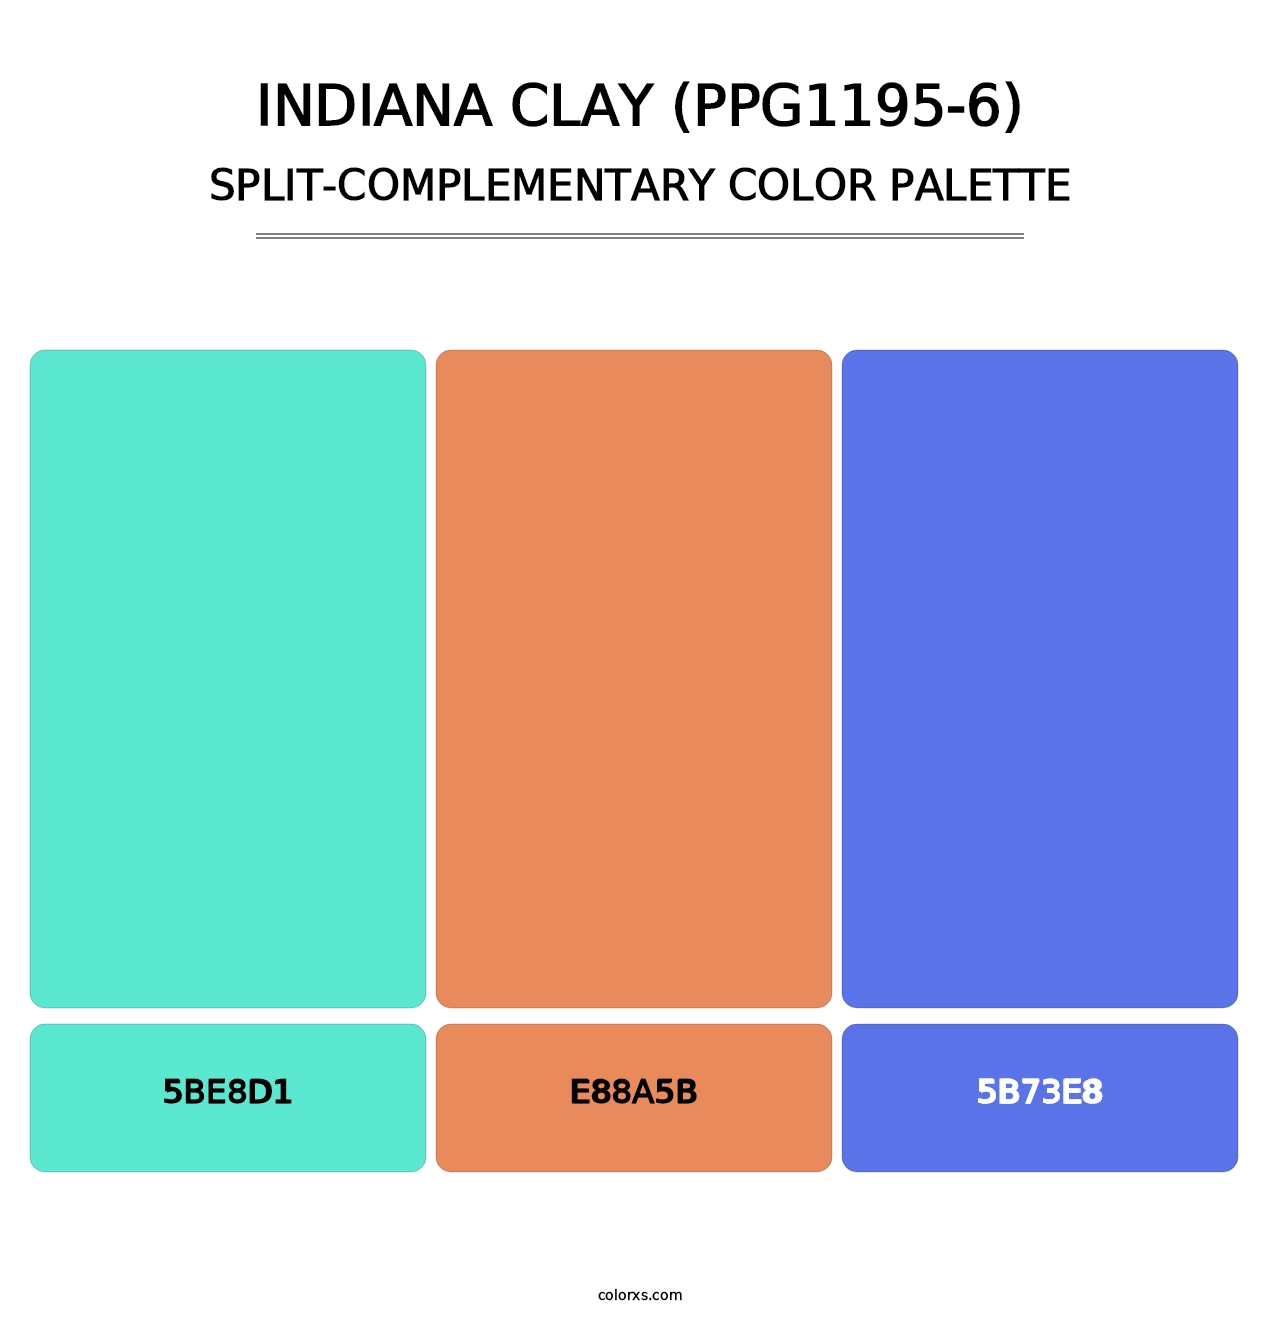 Indiana Clay (PPG1195-6) - Split-Complementary Color Palette